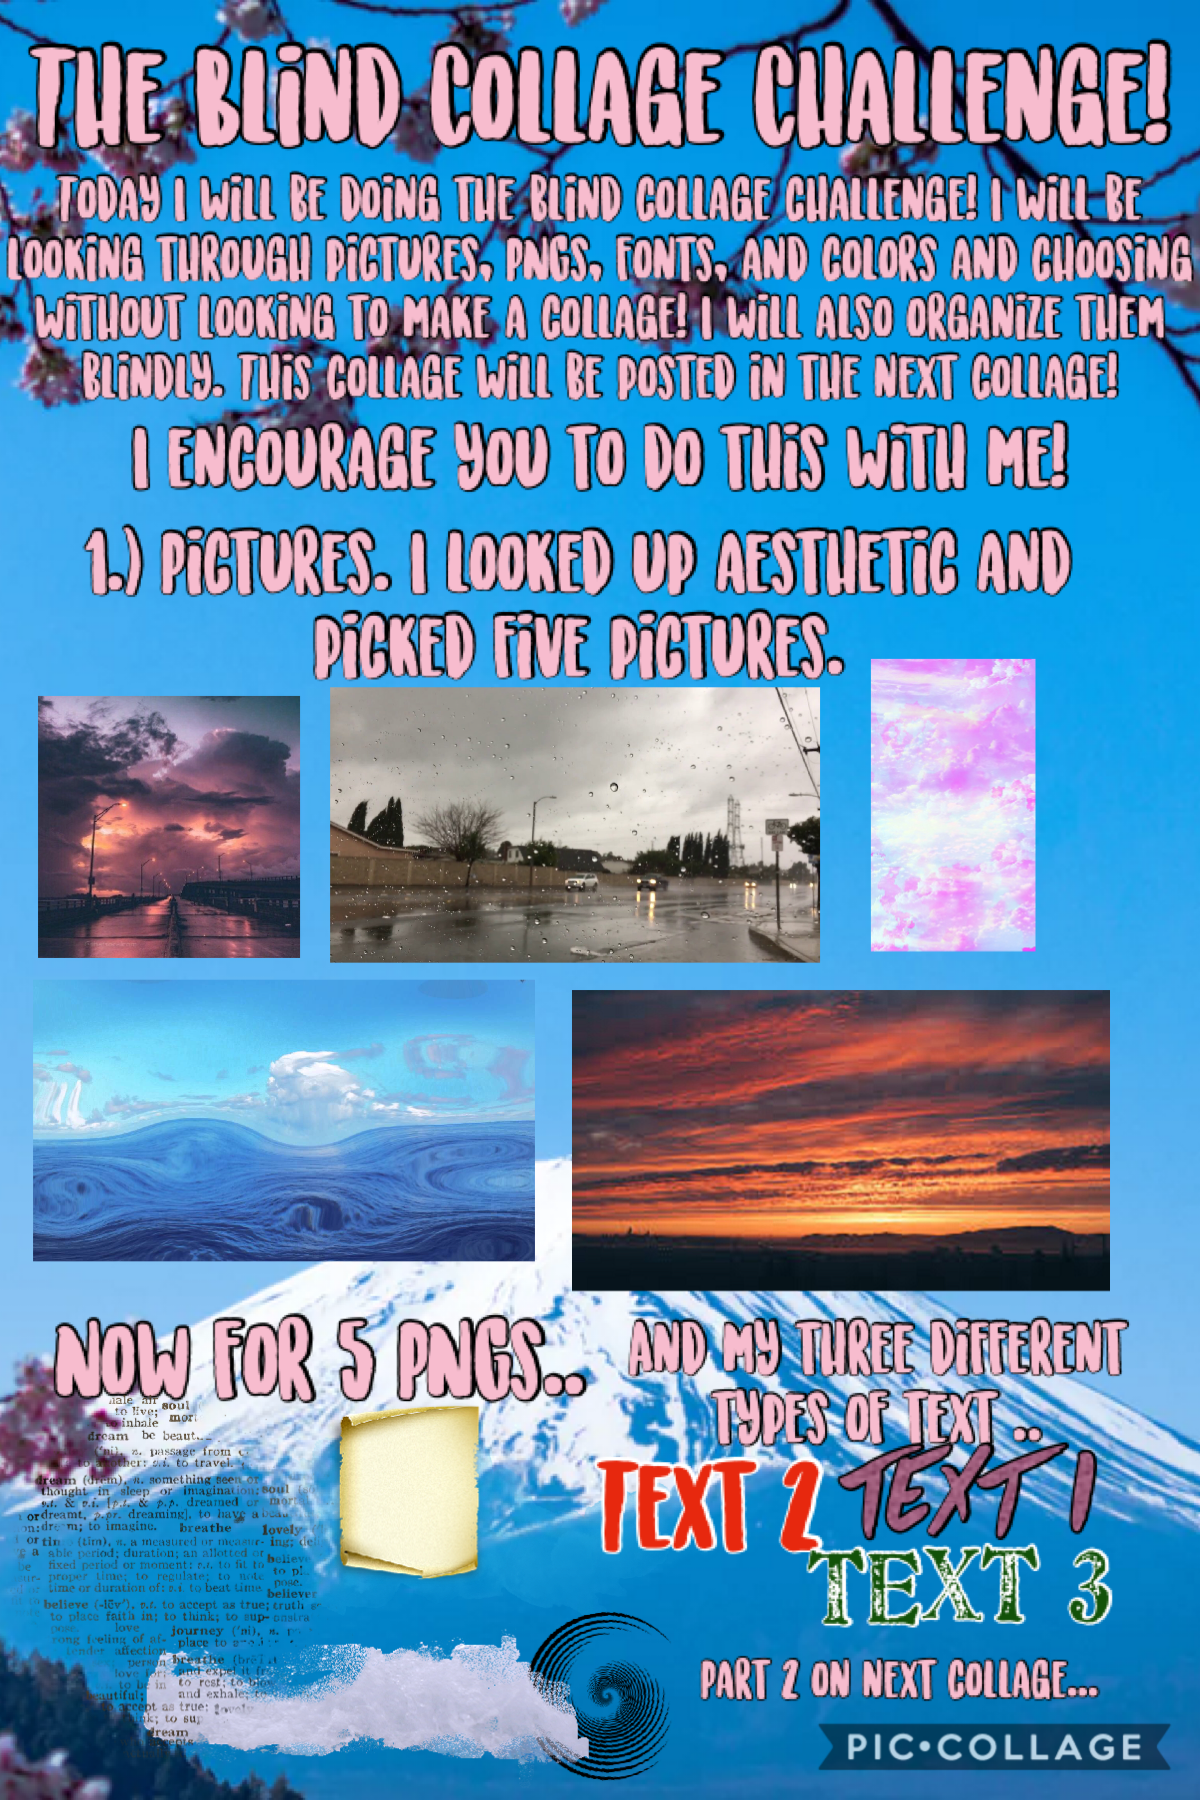 🦋Tap🦋
Sorry for posting Friday! I had post issues yesterday.
QOTC: What’s your best subject?
AOTC: Social Studies. 
Continued on the next collage! 
